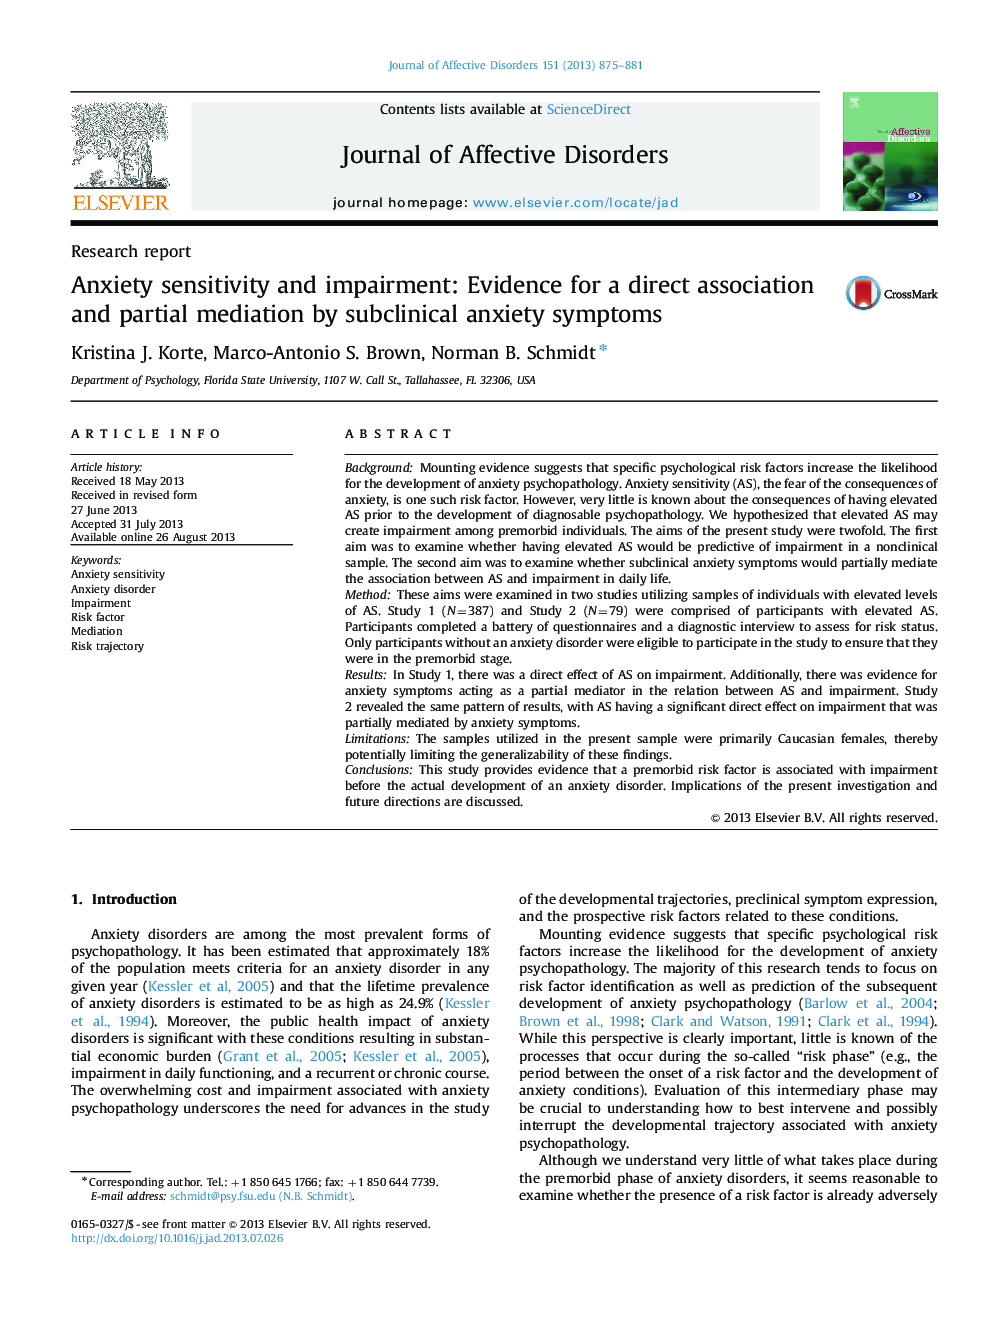 Anxiety sensitivity and impairment: Evidence for a direct association and partial mediation by subclinical anxiety symptoms